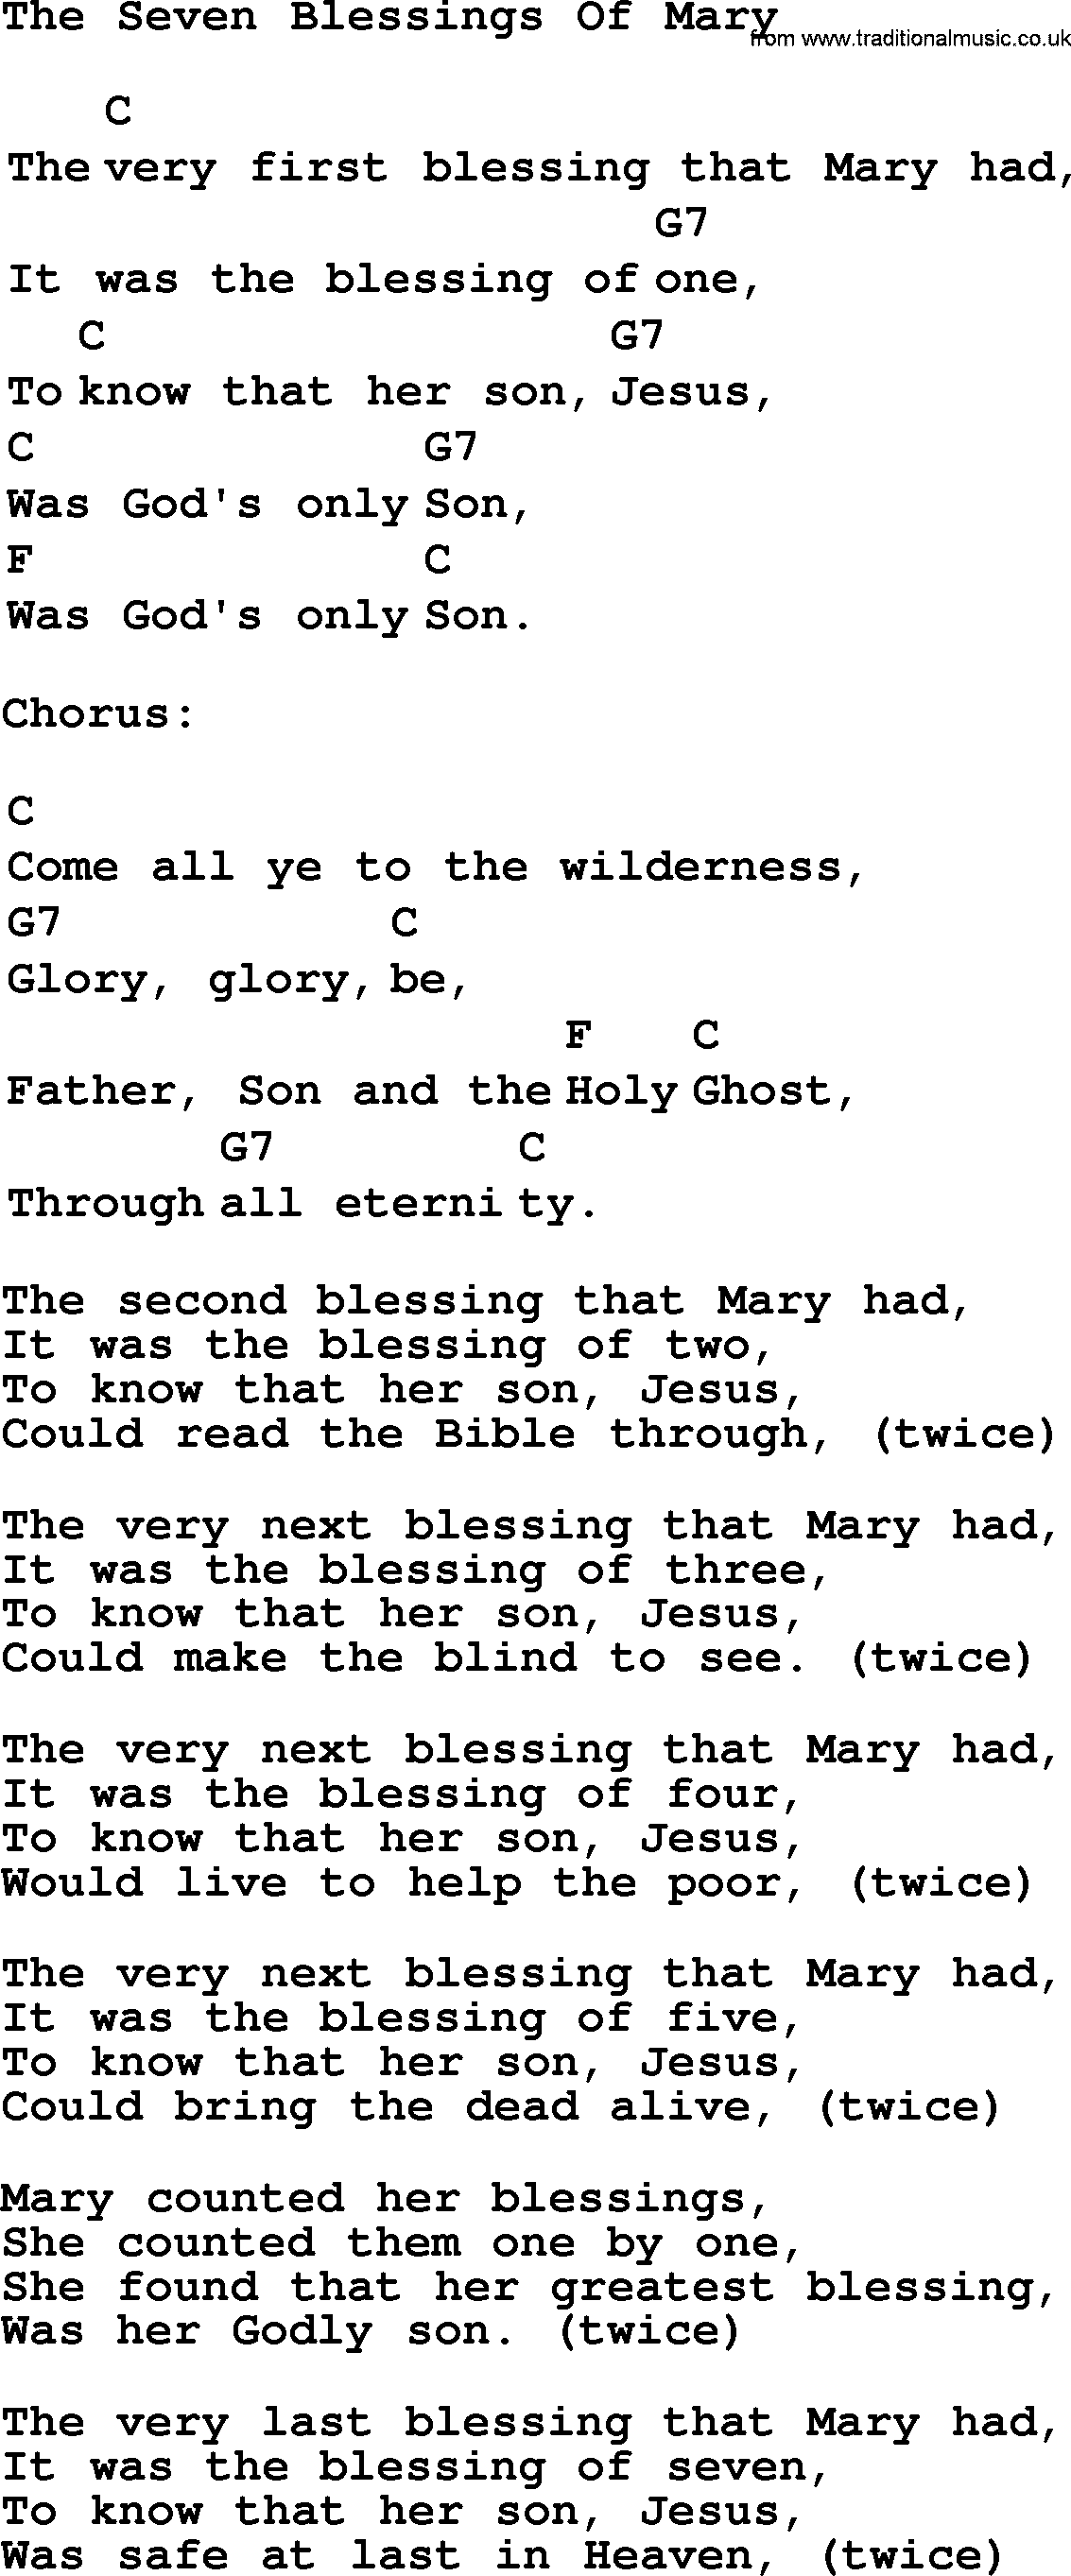 Top 1000 Most Popular Folk and Old-time Songs: Seven Blessings Of Mary, lyrics and chords